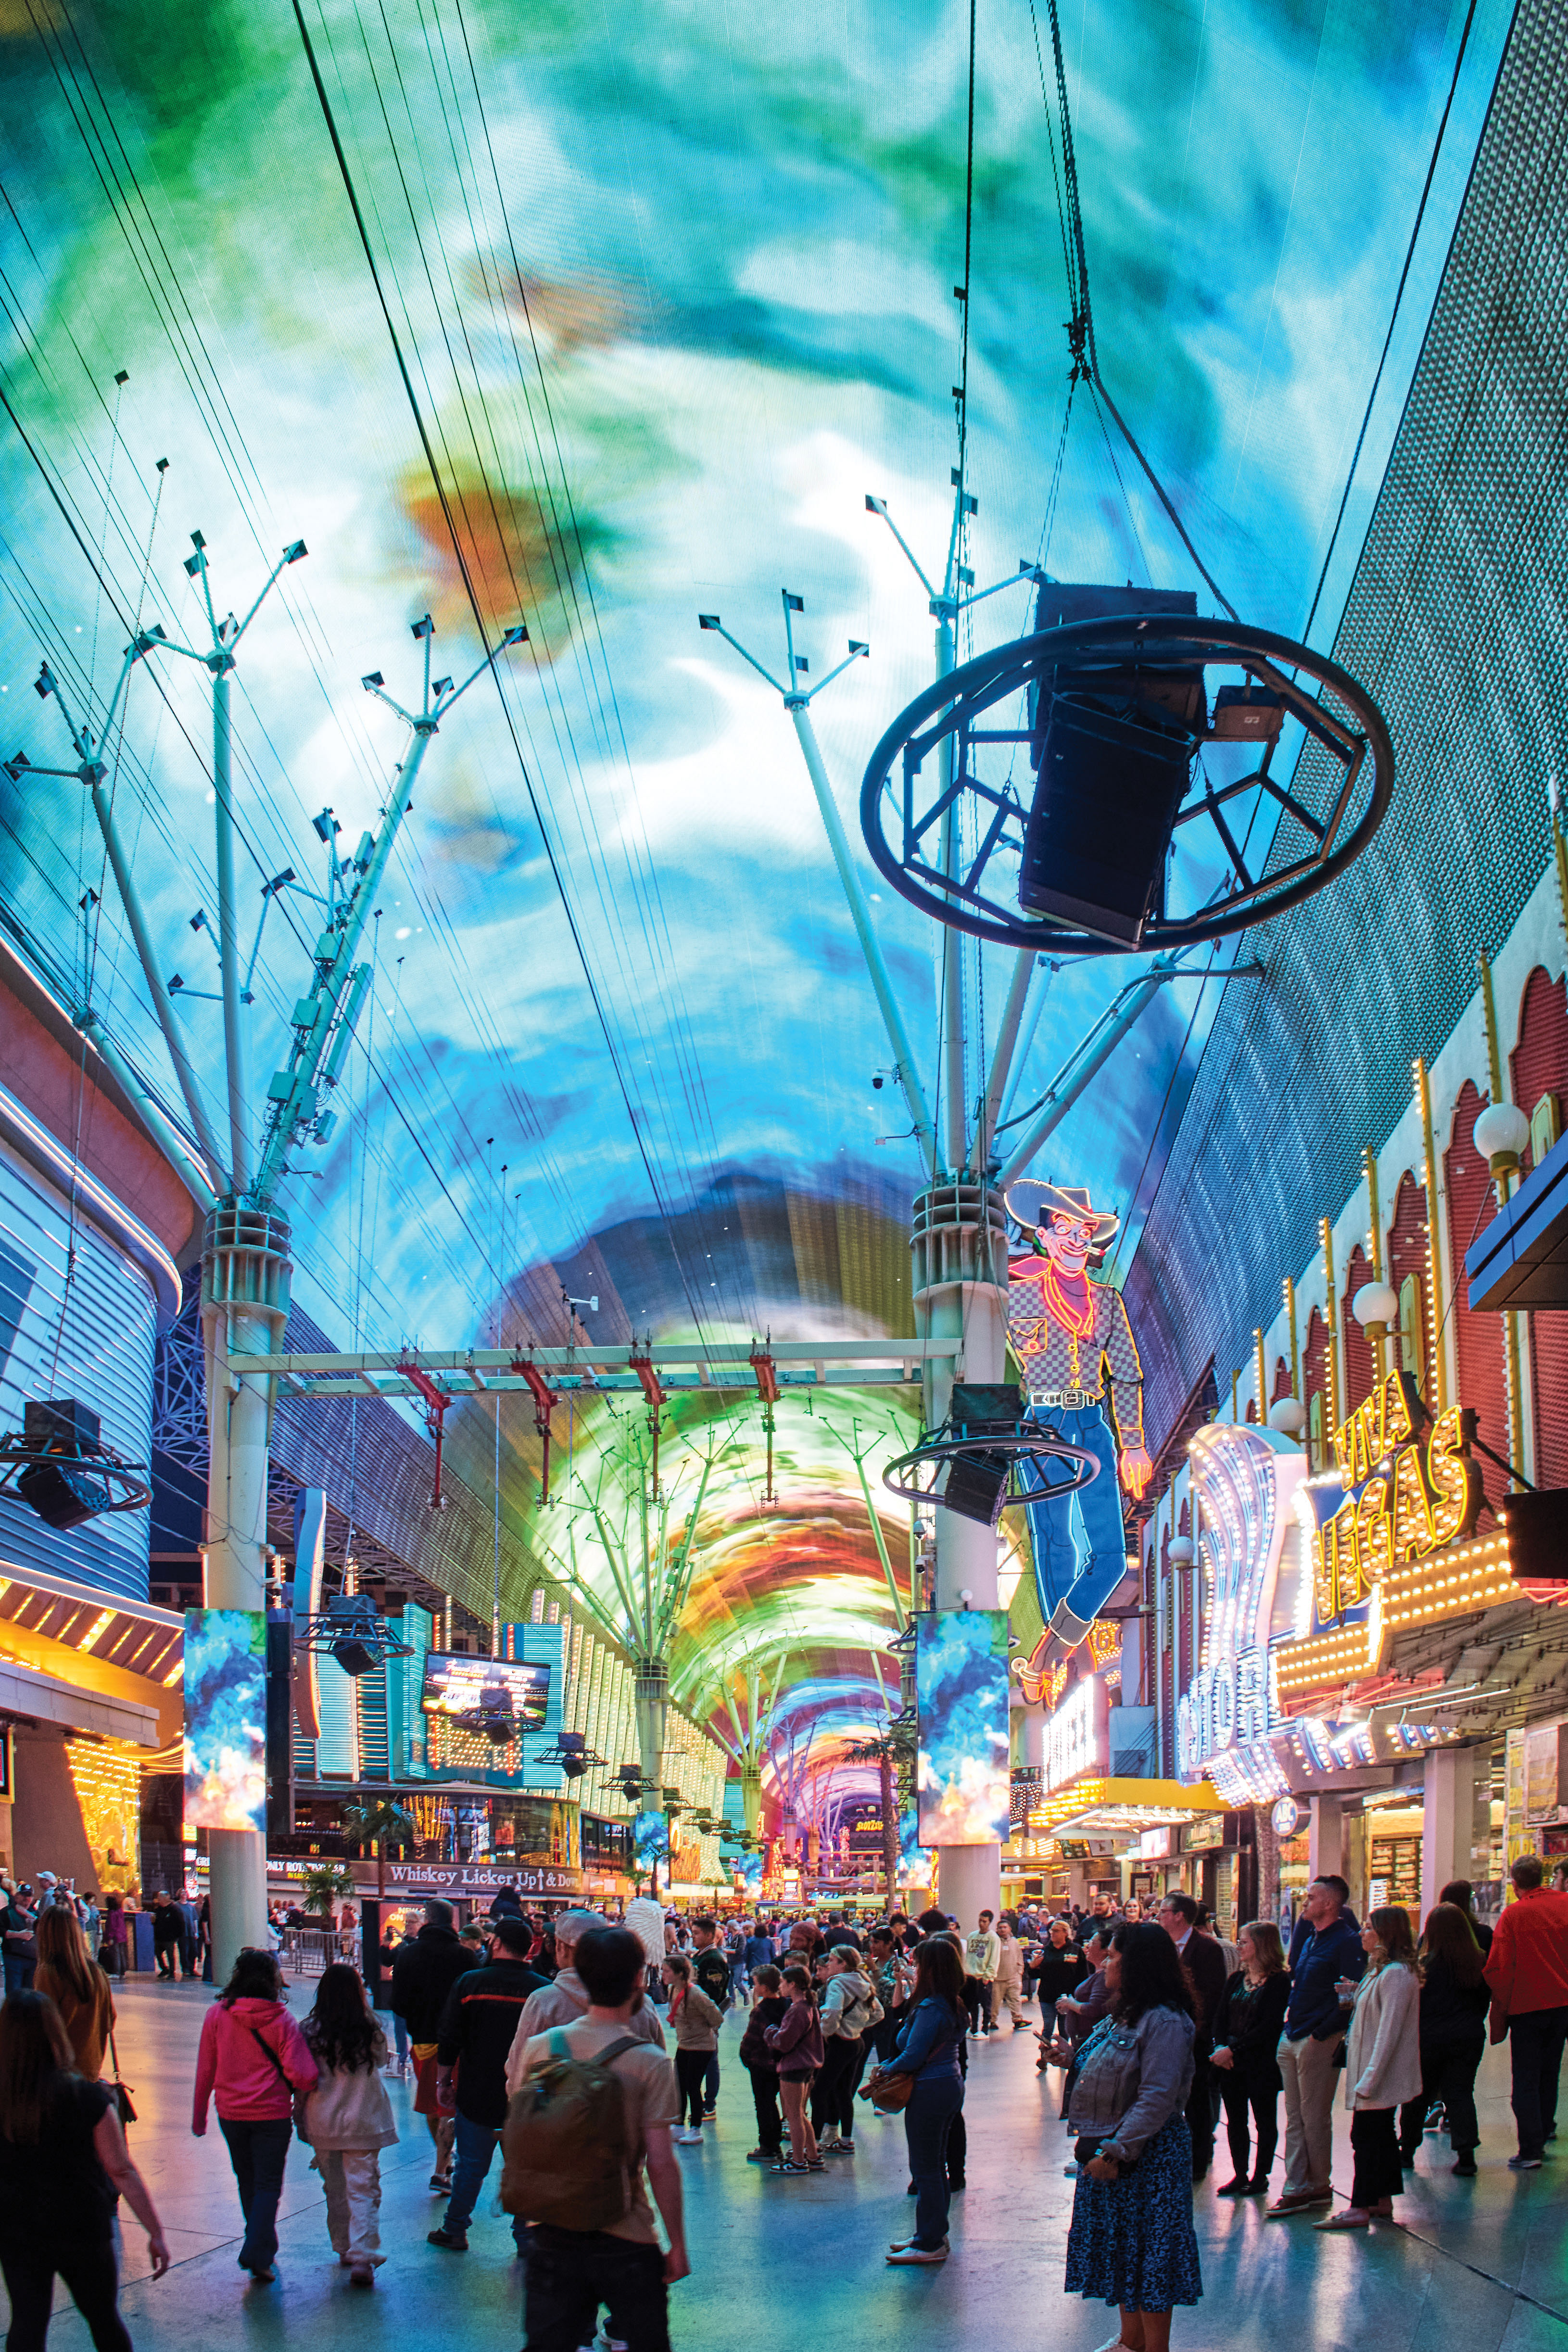 Electric Avenue:Nostalgic “old Vegas” on Fremont Street, now domed and closed to cars; crowds gather here around street performers while signs glow overhead.